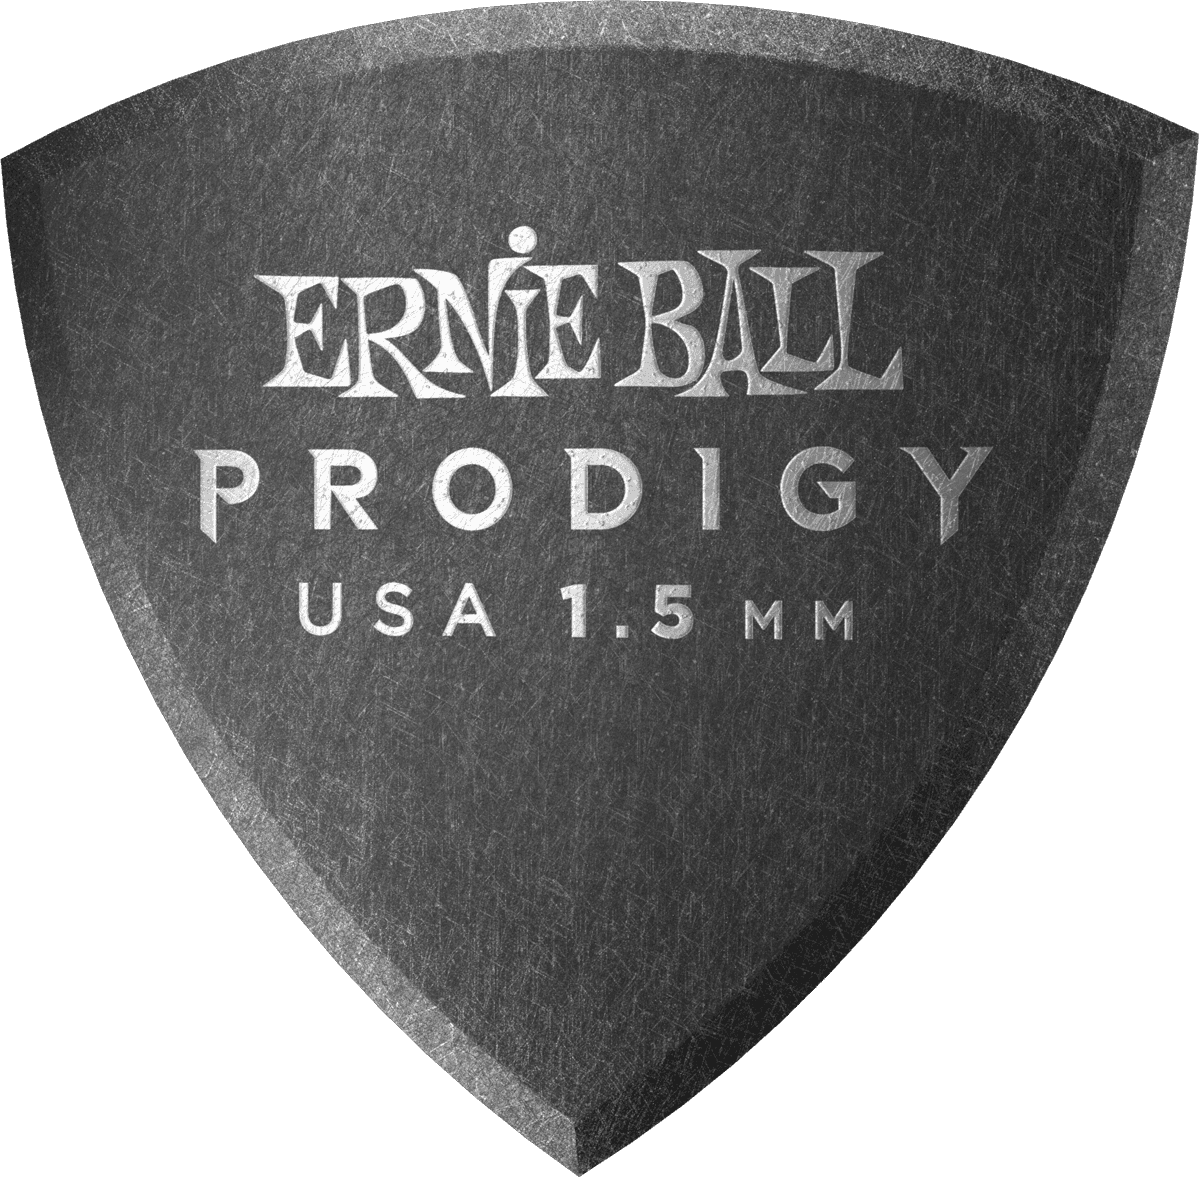 Ernie Ball Prodigy Shield 1,5mm (x6 Pack) - Plectrum - Main picture